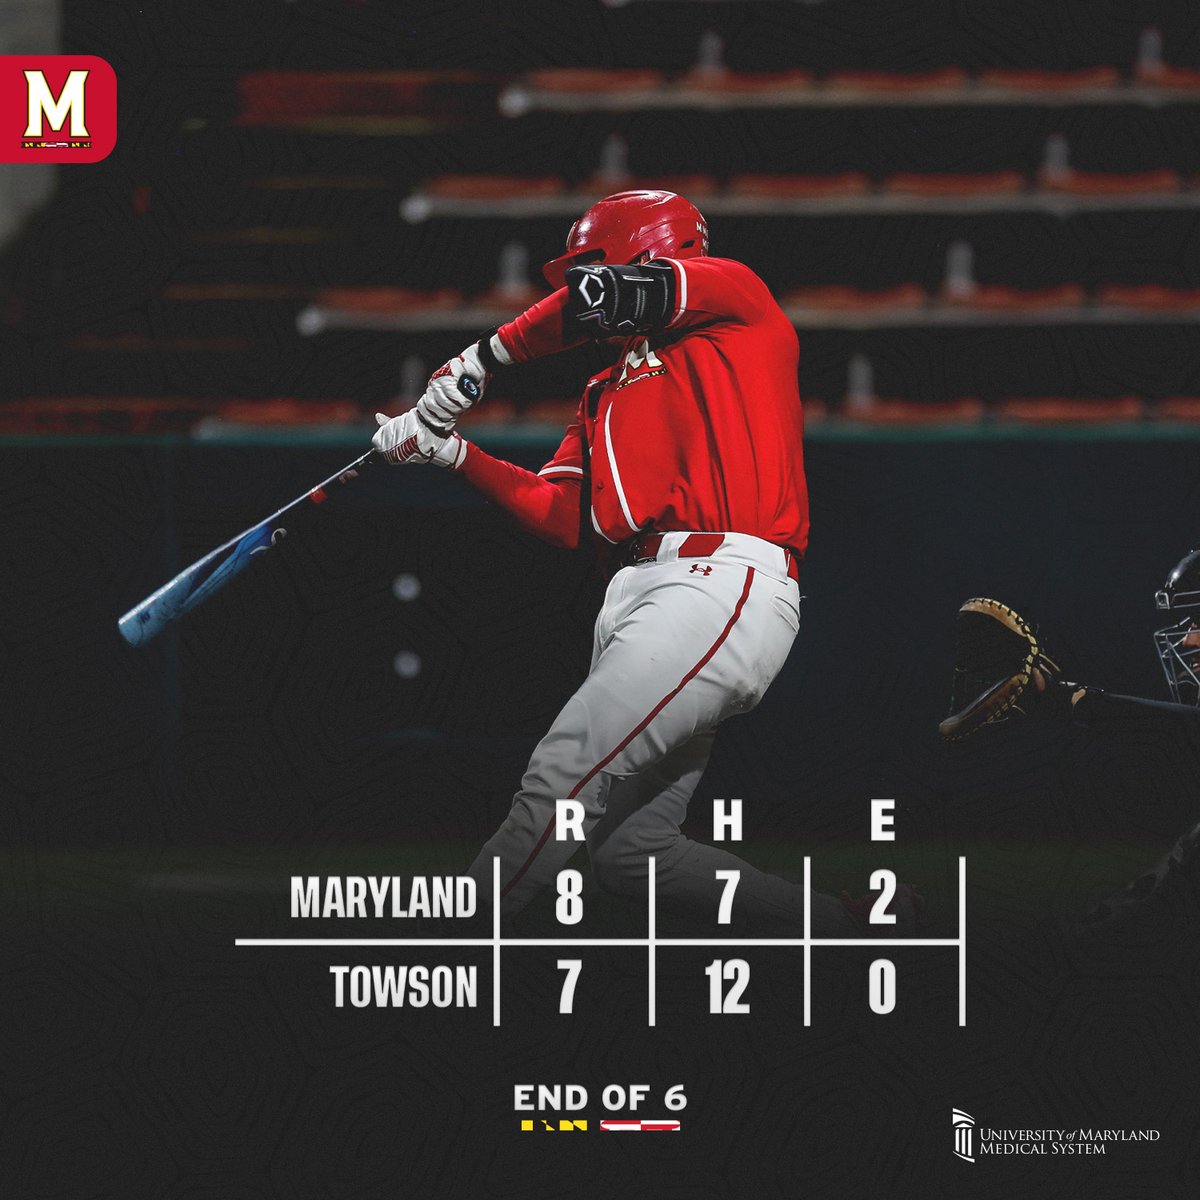 Terps lead after six innings #DirtyTerps